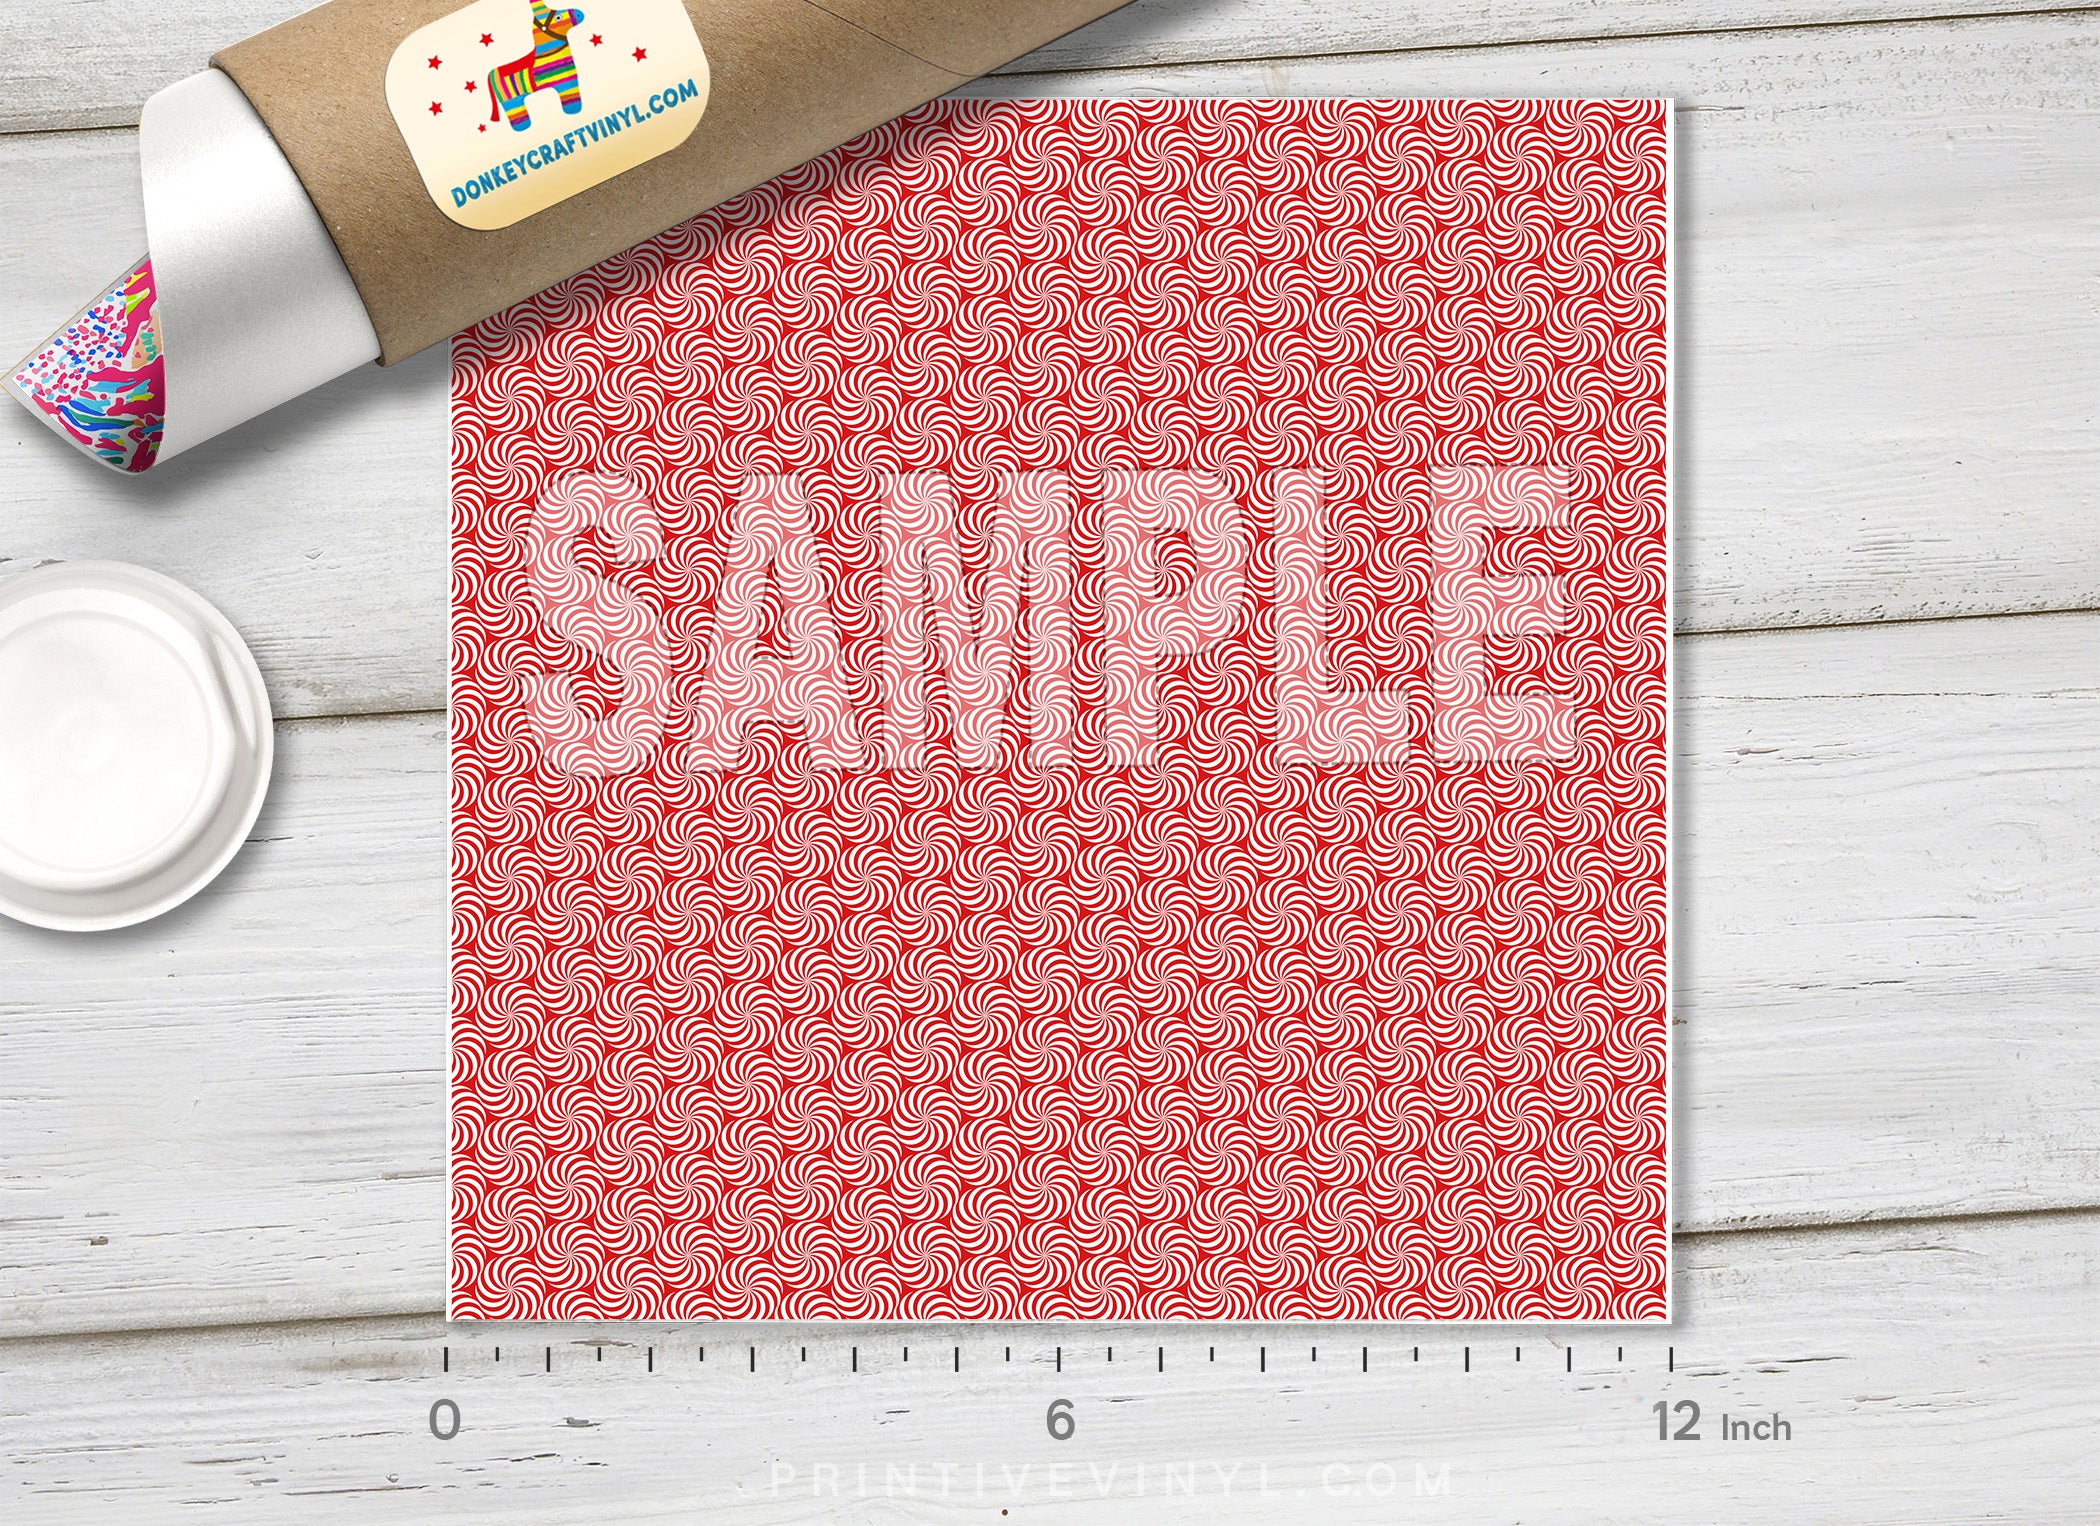 Copy of Christmas Patterned Adhesive Vinyl X583